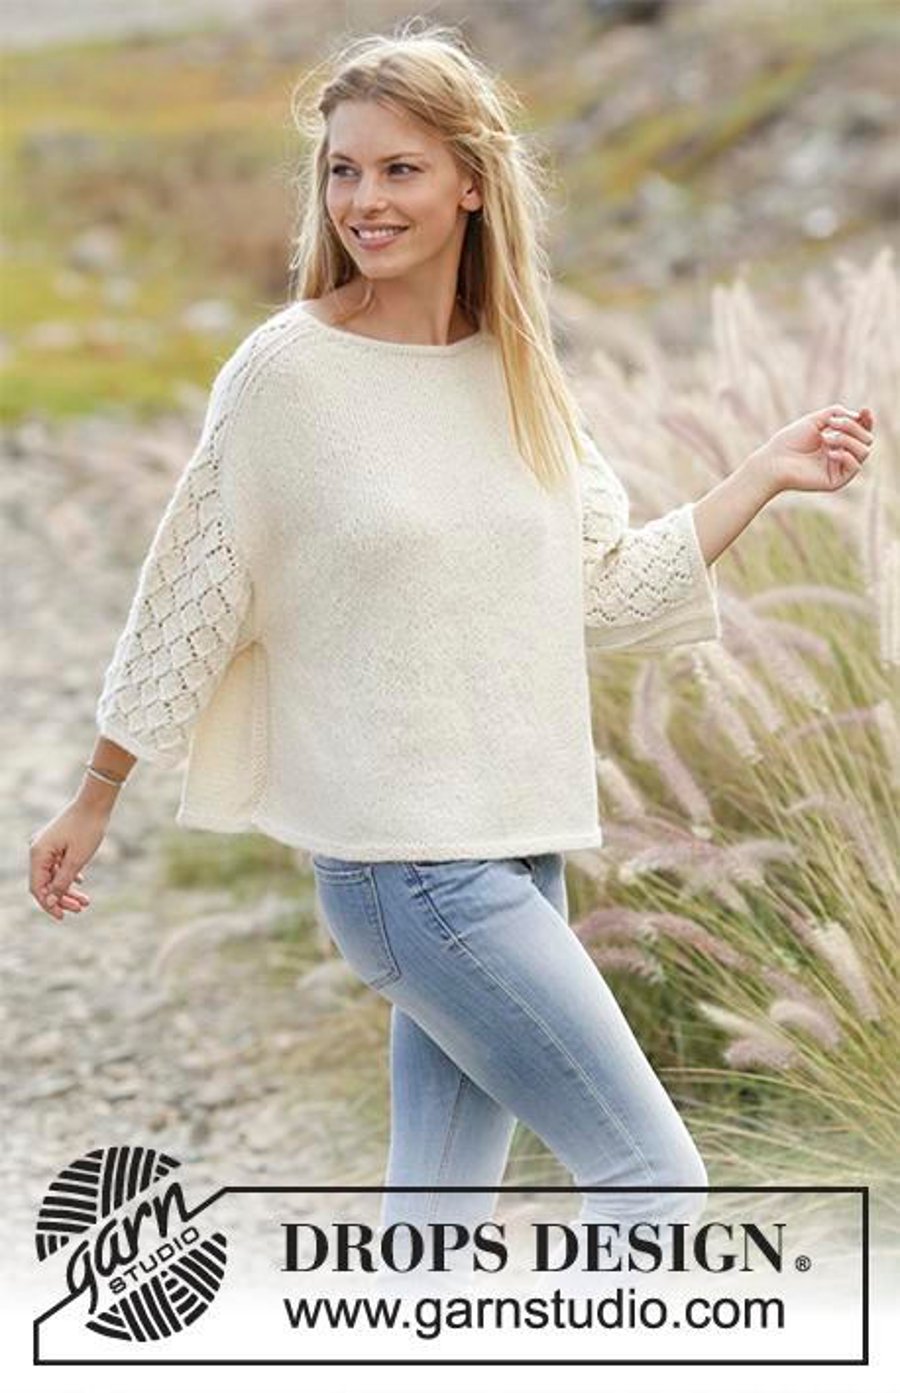 Hand knitted ladies jumper sweater with short length lacy knit sleeves - knit 